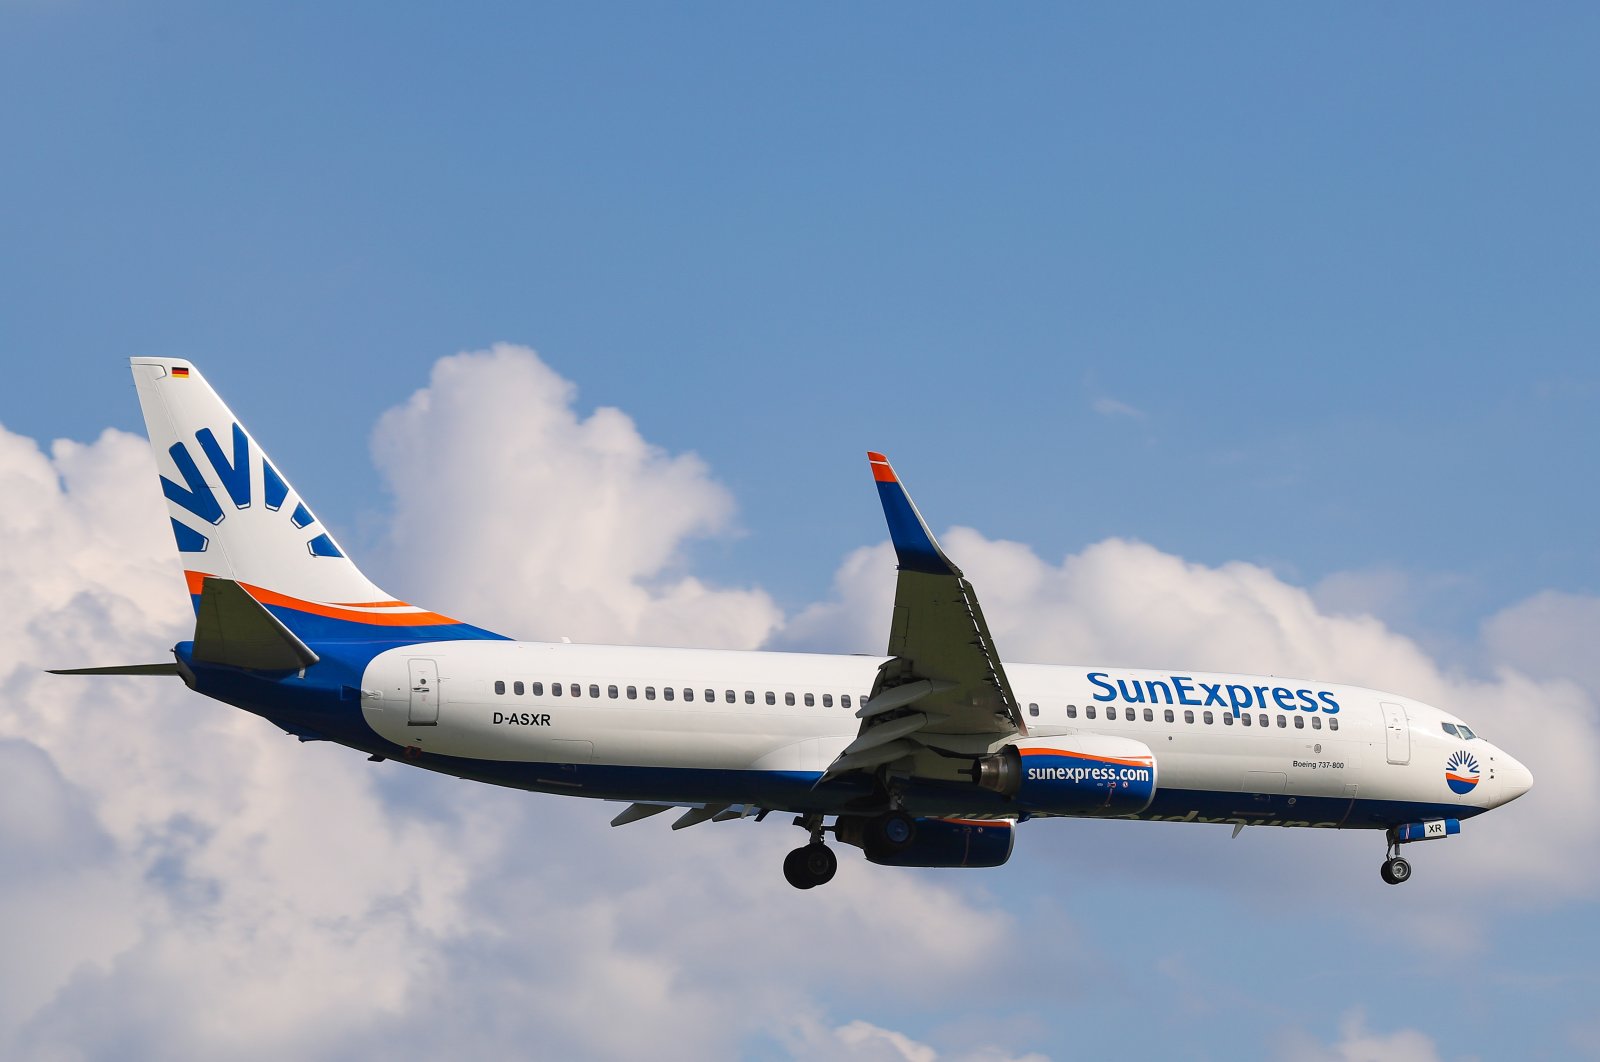 SunExpress Boeing 737-800 aircraft is seen while landing at Dusseldorf International Airport, Germany, May 25, 2019. (Reuters Photo)